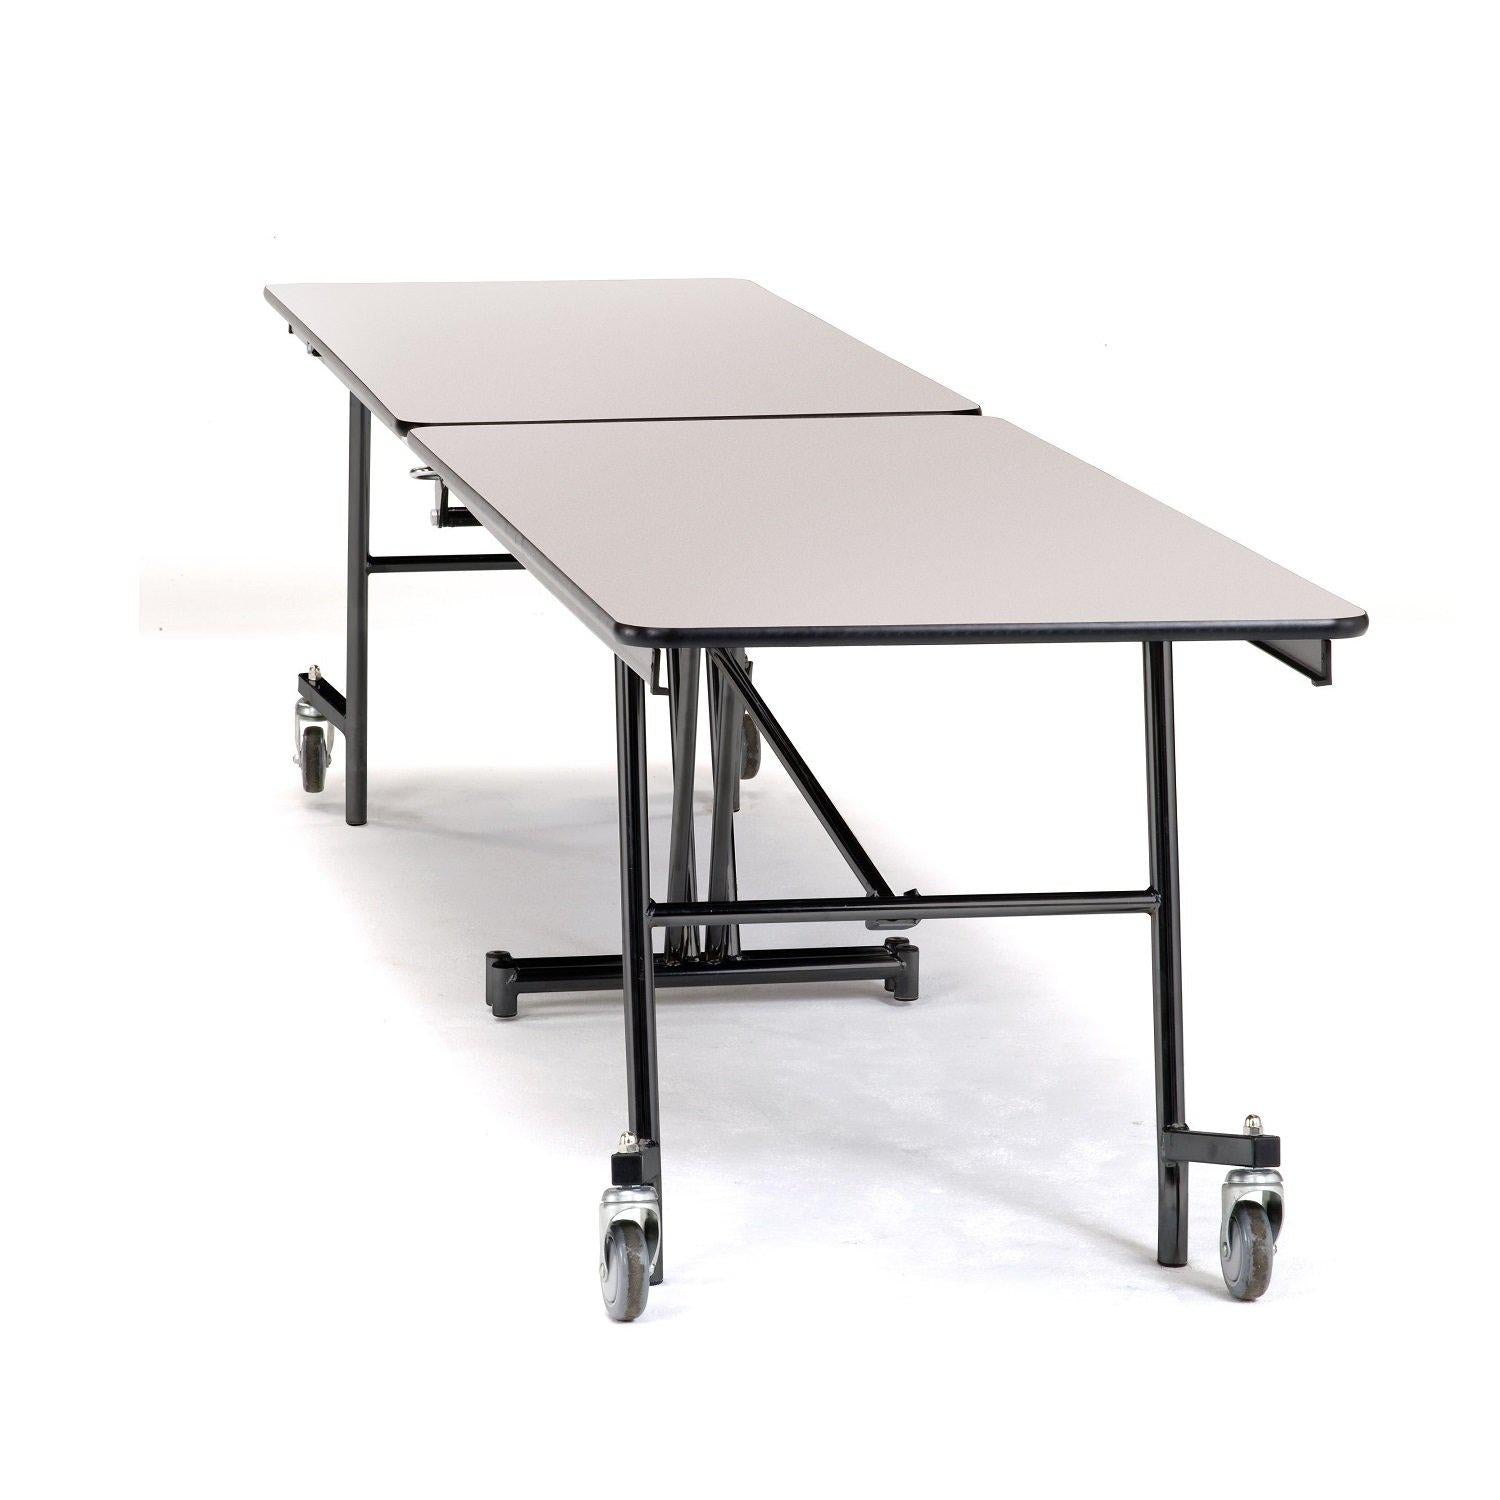 Mobile Shape Cafeteria Table, 8' Rectangle, MDF Core, Black ProtectEdge, Textured Black Frame